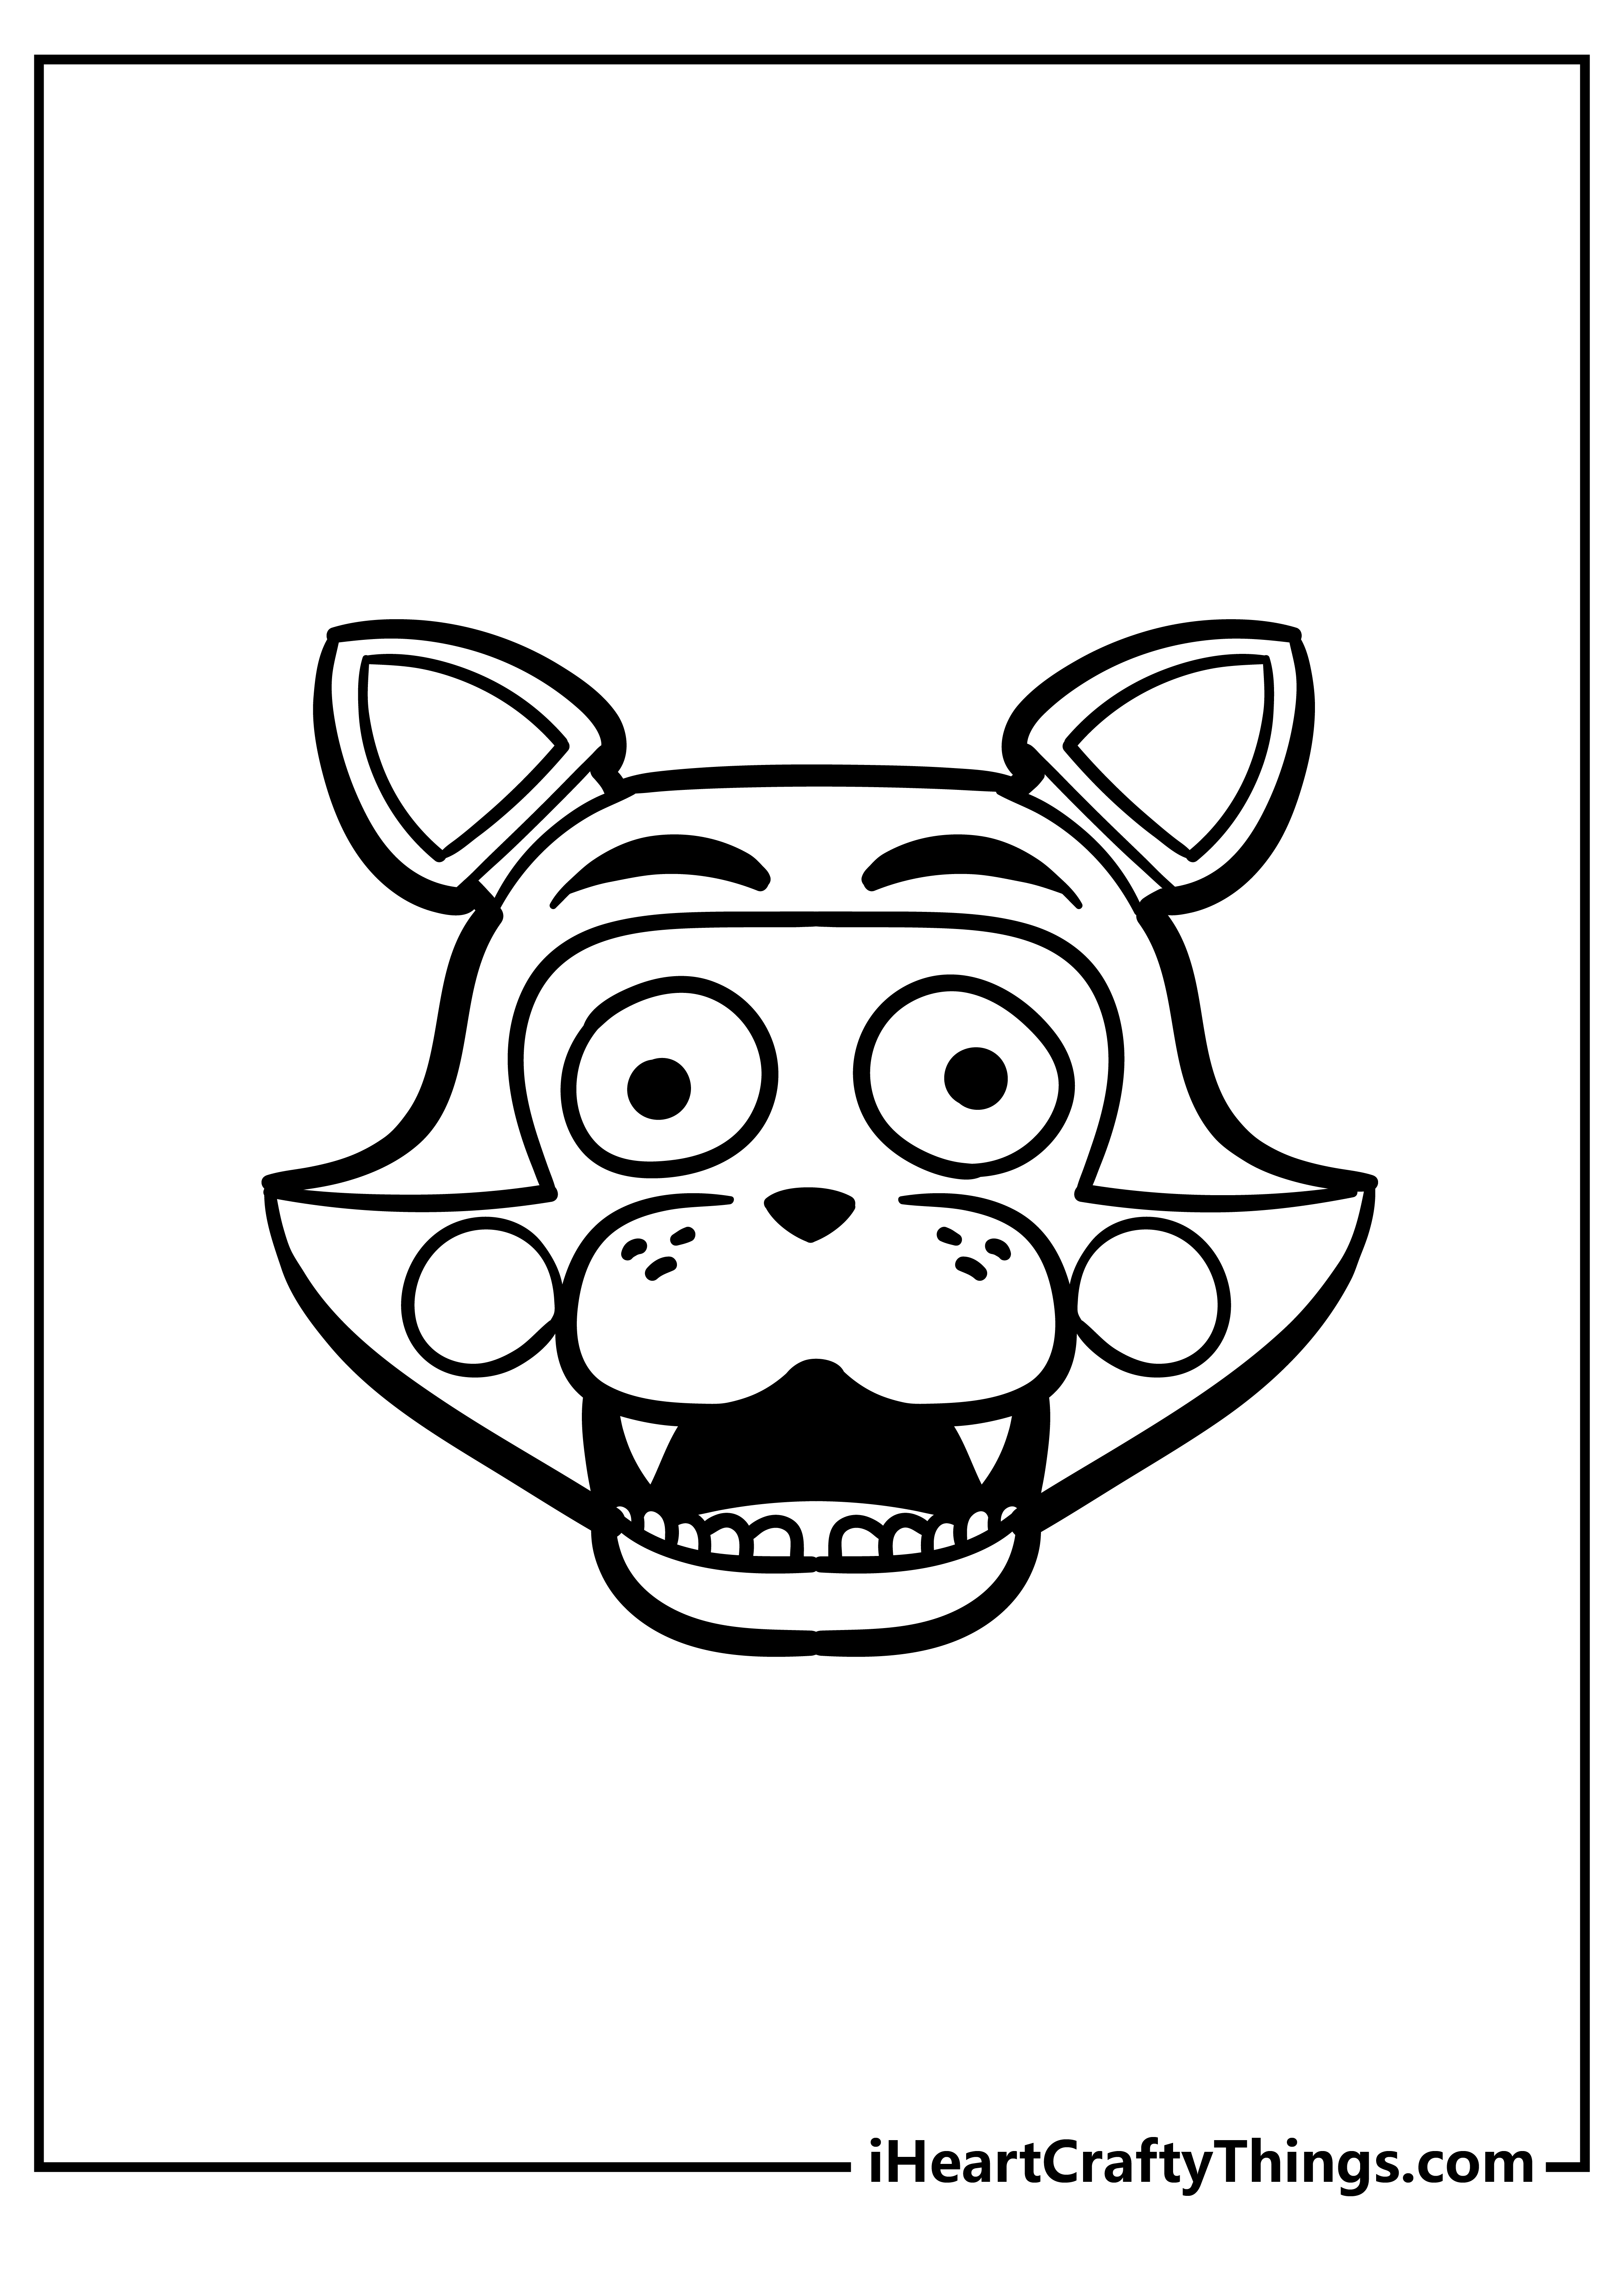 Five Nights At Freddy’s Easy Coloring Pages